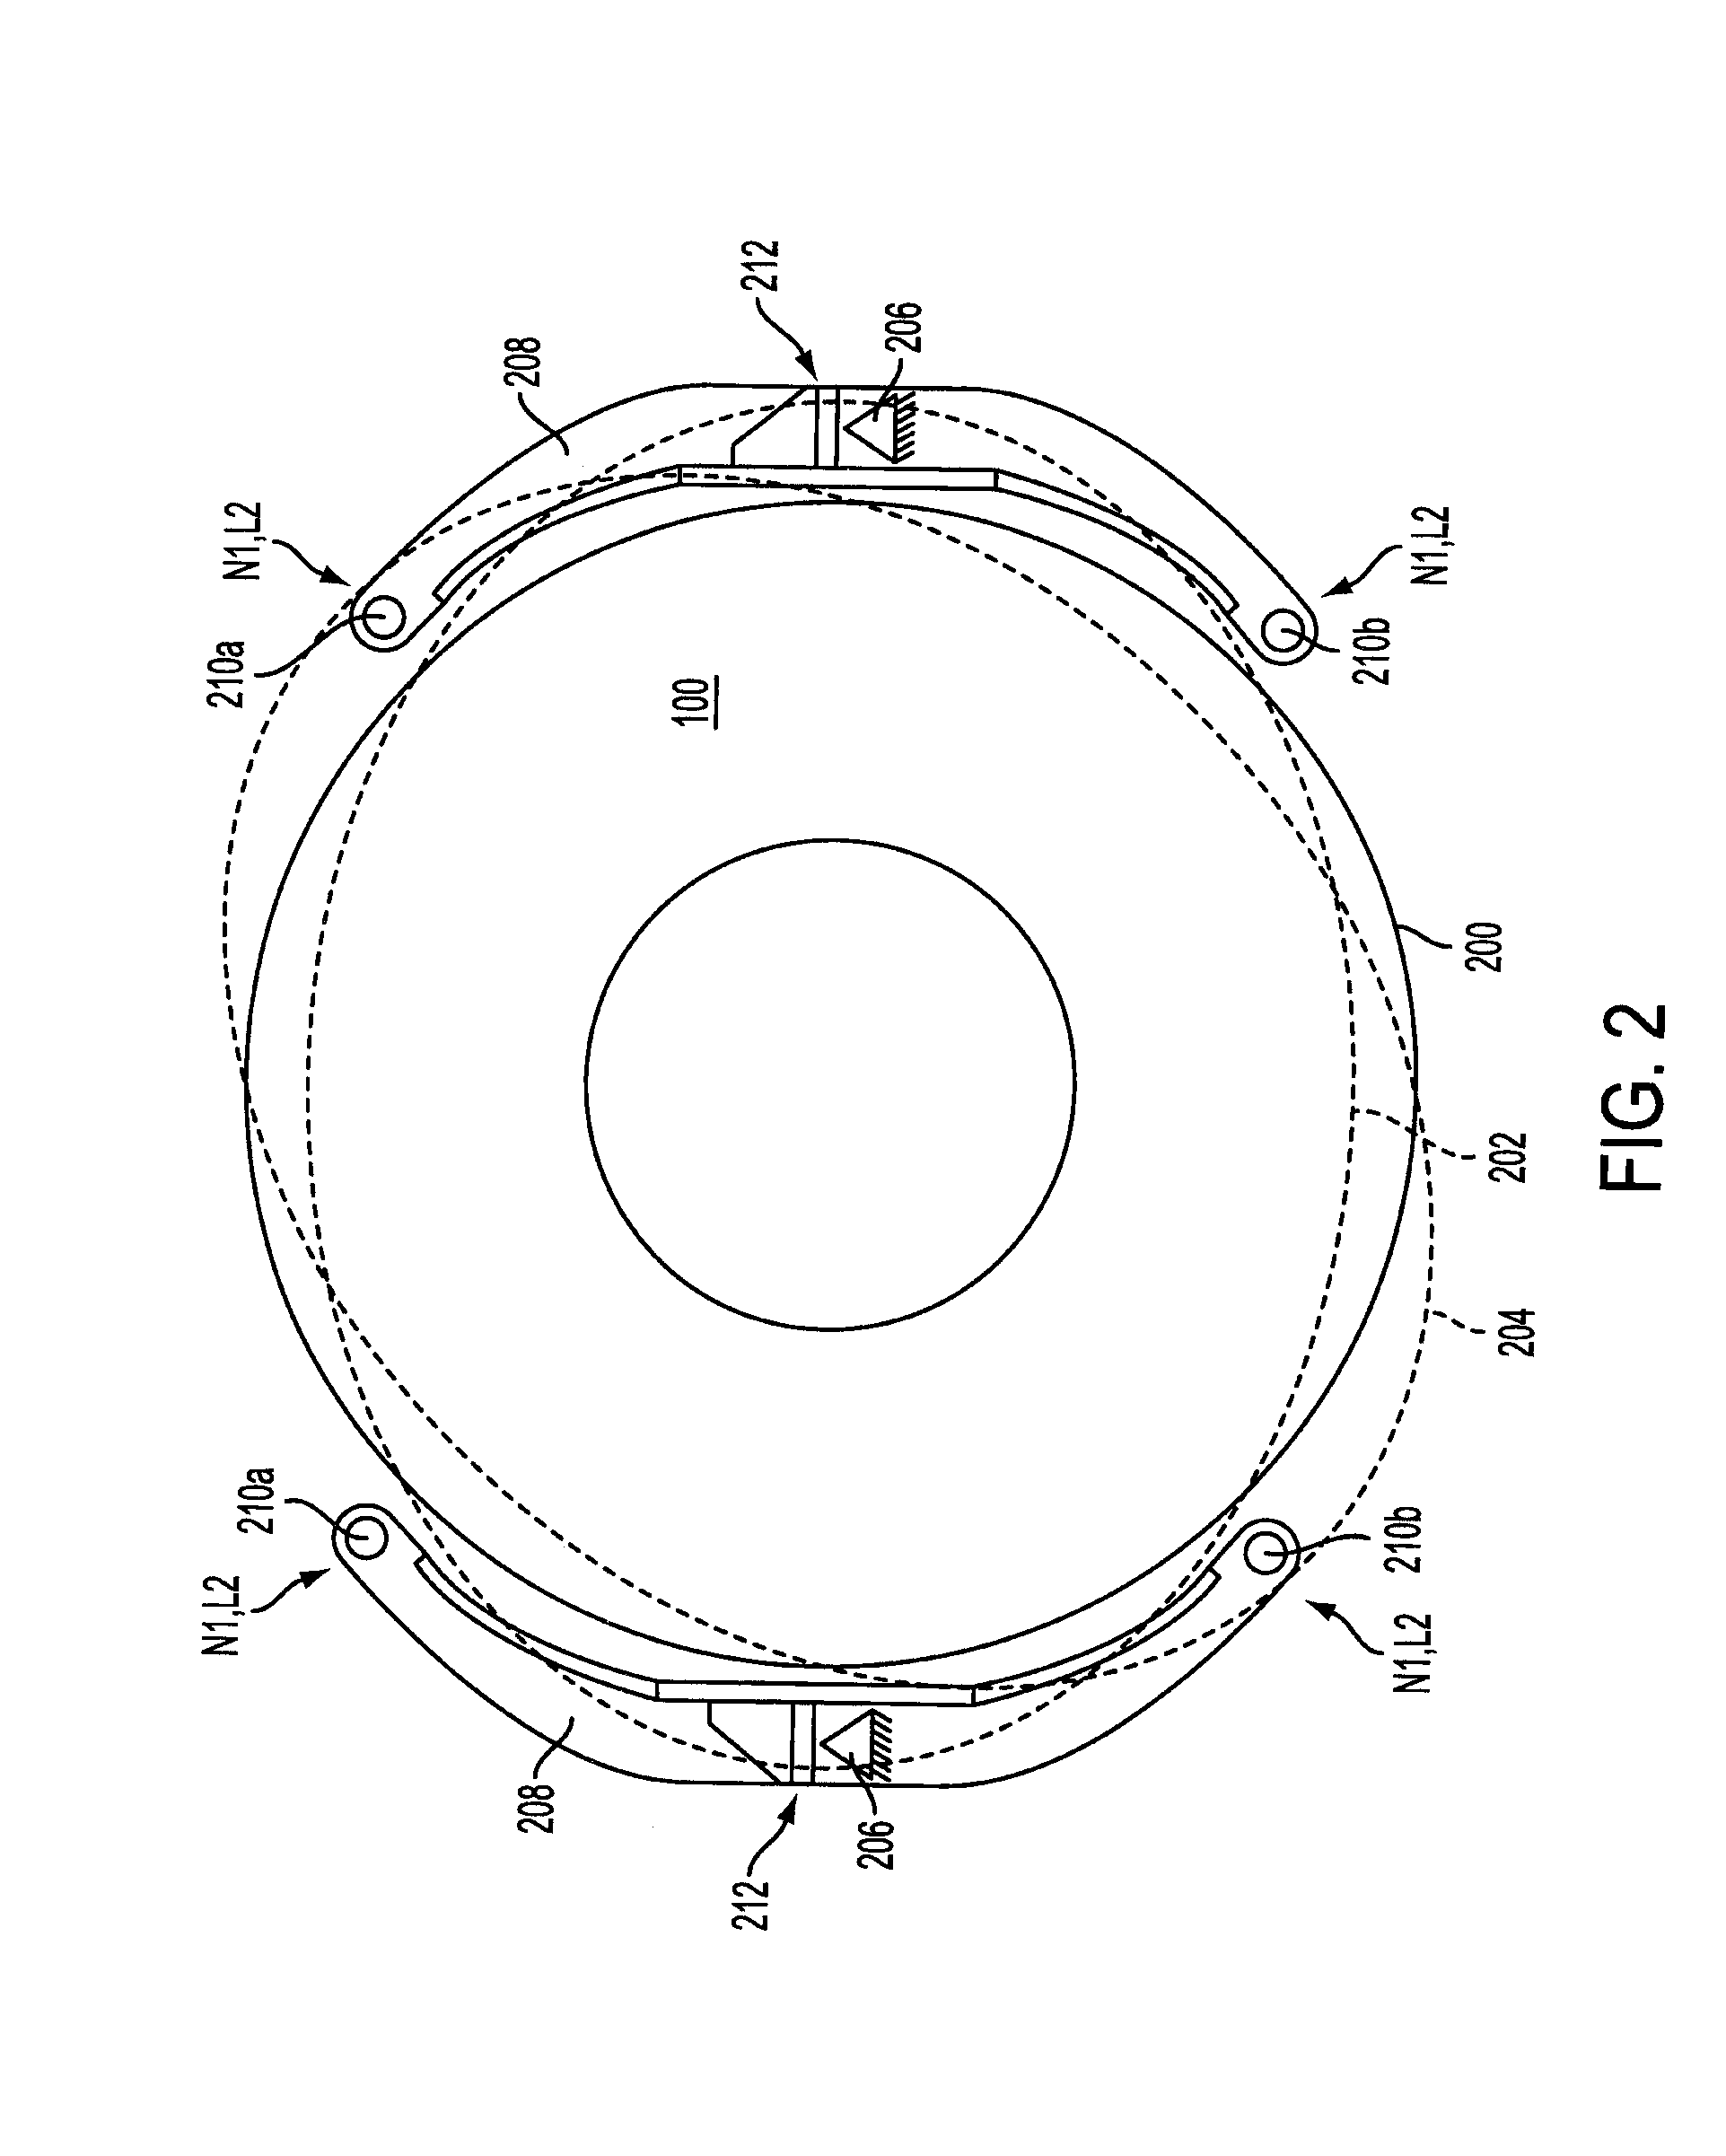 Apparatus and method for suspending a stator core of an electric generator